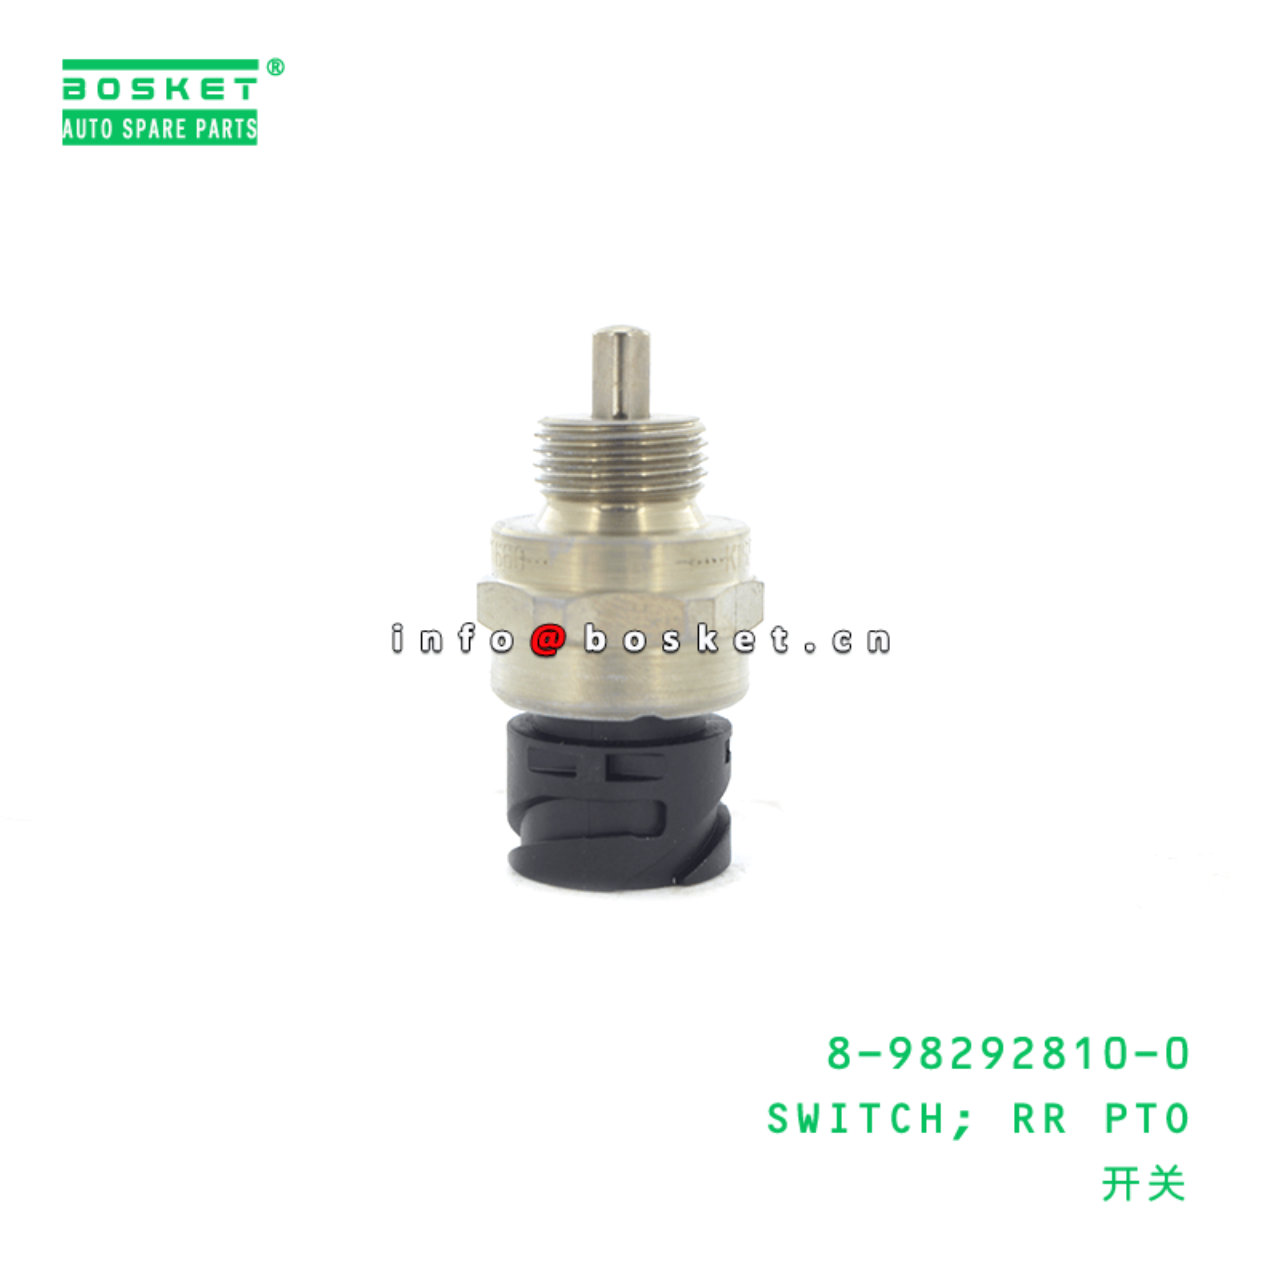 8-98292810-0 Rear Power Take Off Switch 8982928100 Suitable for 